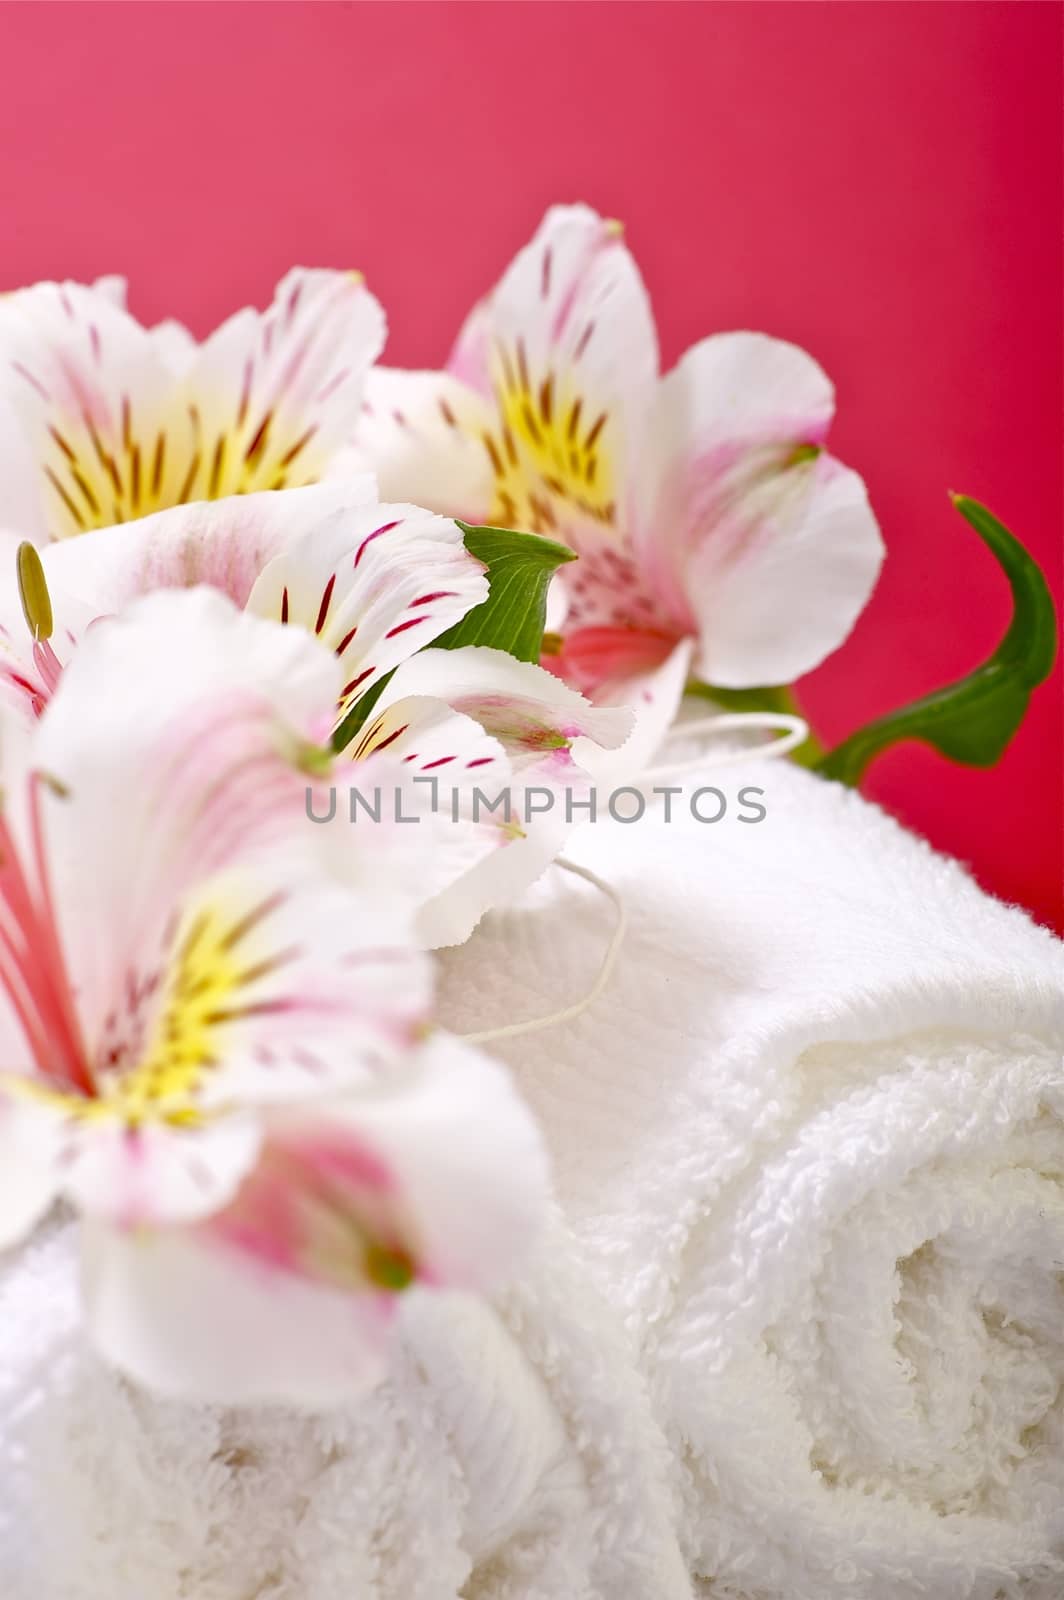 Flowers and Towels - Alstroemeria Flowers and Fresh White Towels. Pinky-Red Background.